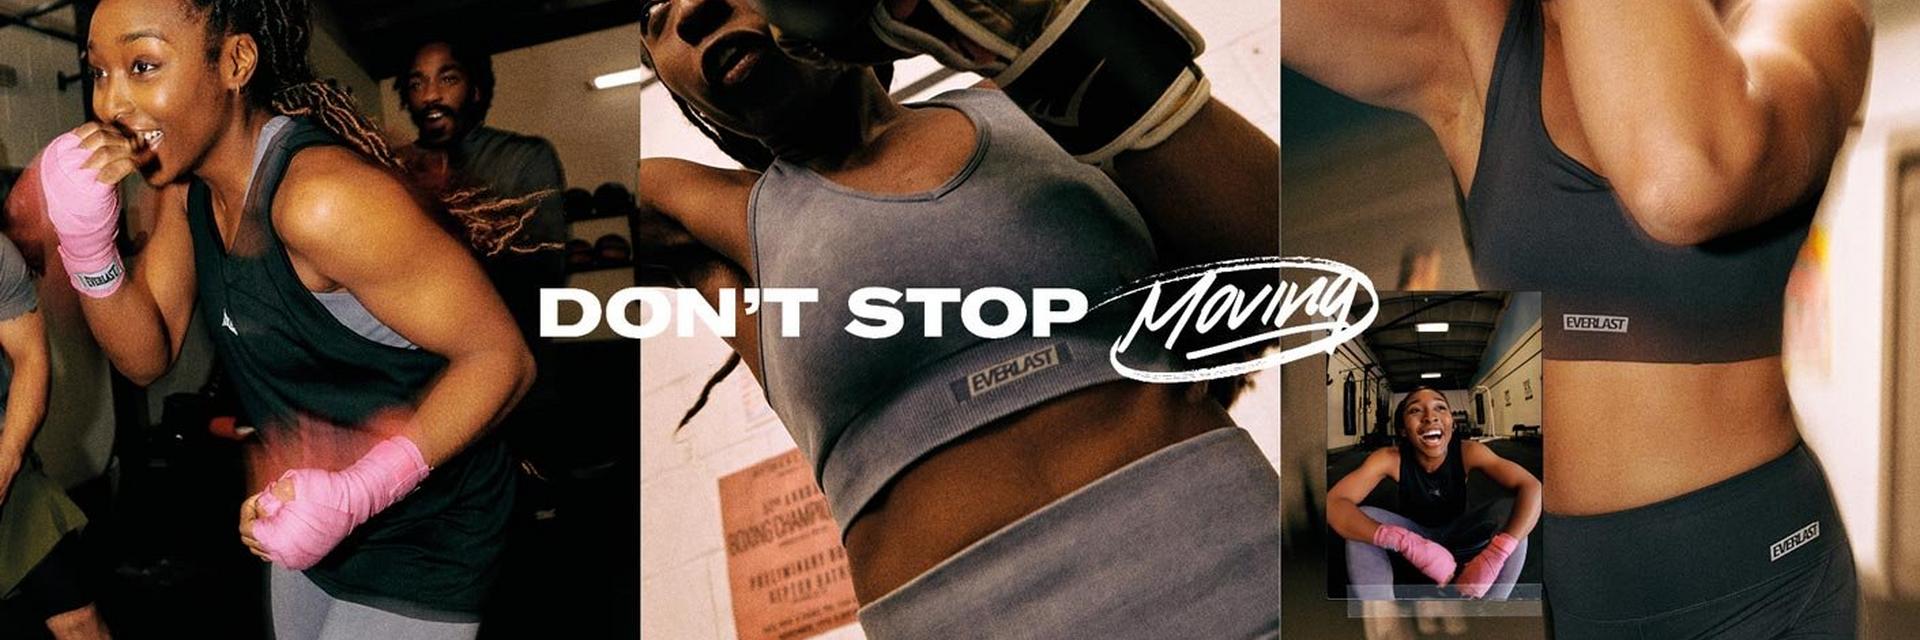 Dont Stop Moving Everlast